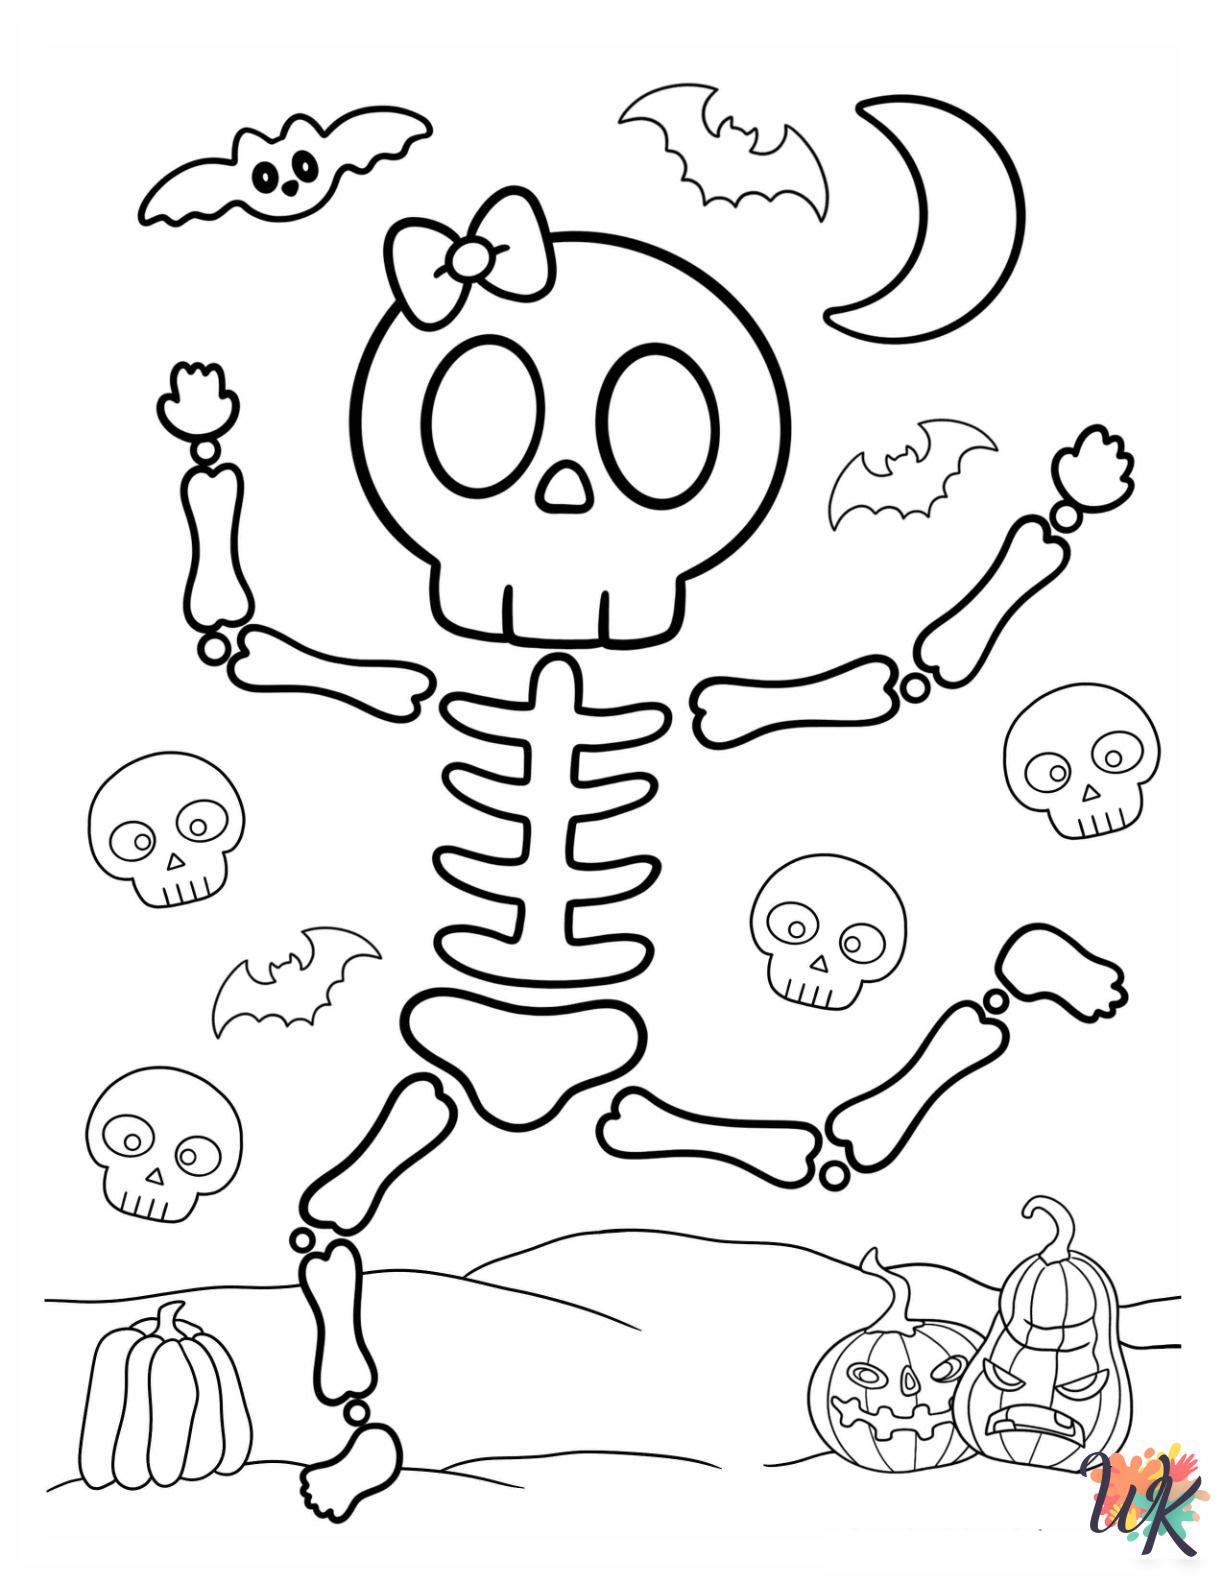 printable Skeleton coloring pages for adults